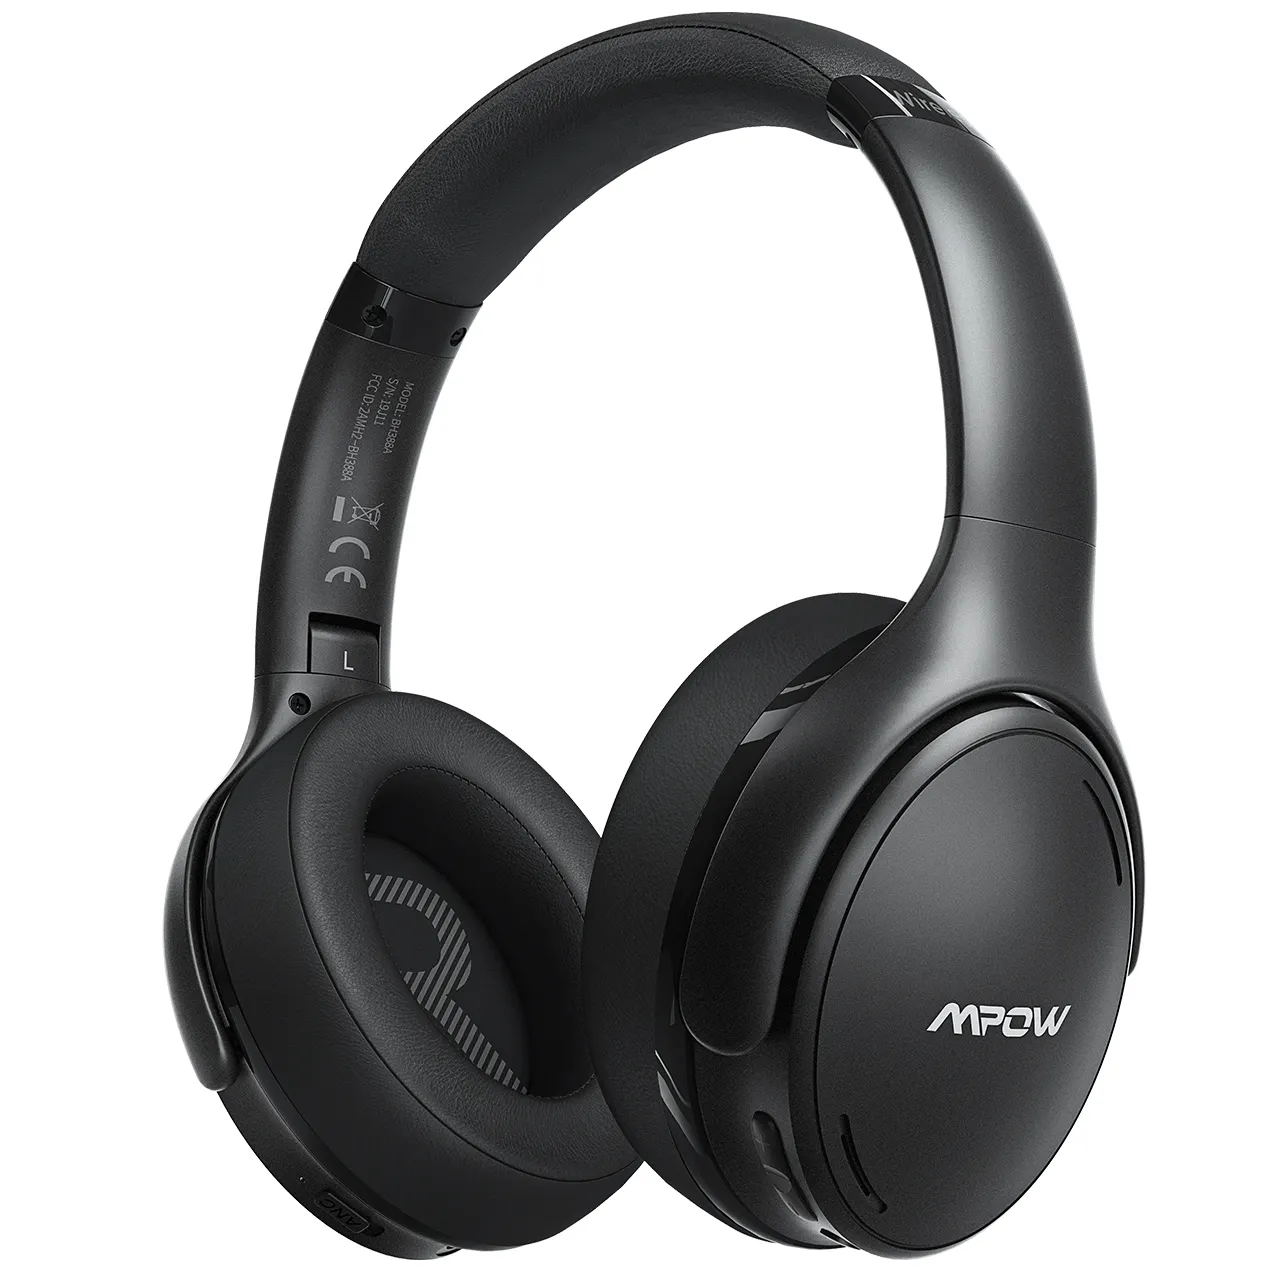 Mpow H19 IPO BT5.0 Active Noise Cancelling Headphones Lightweight Wireless Headset CVC 8.0 Mic 30hrs Playing Fast Charge